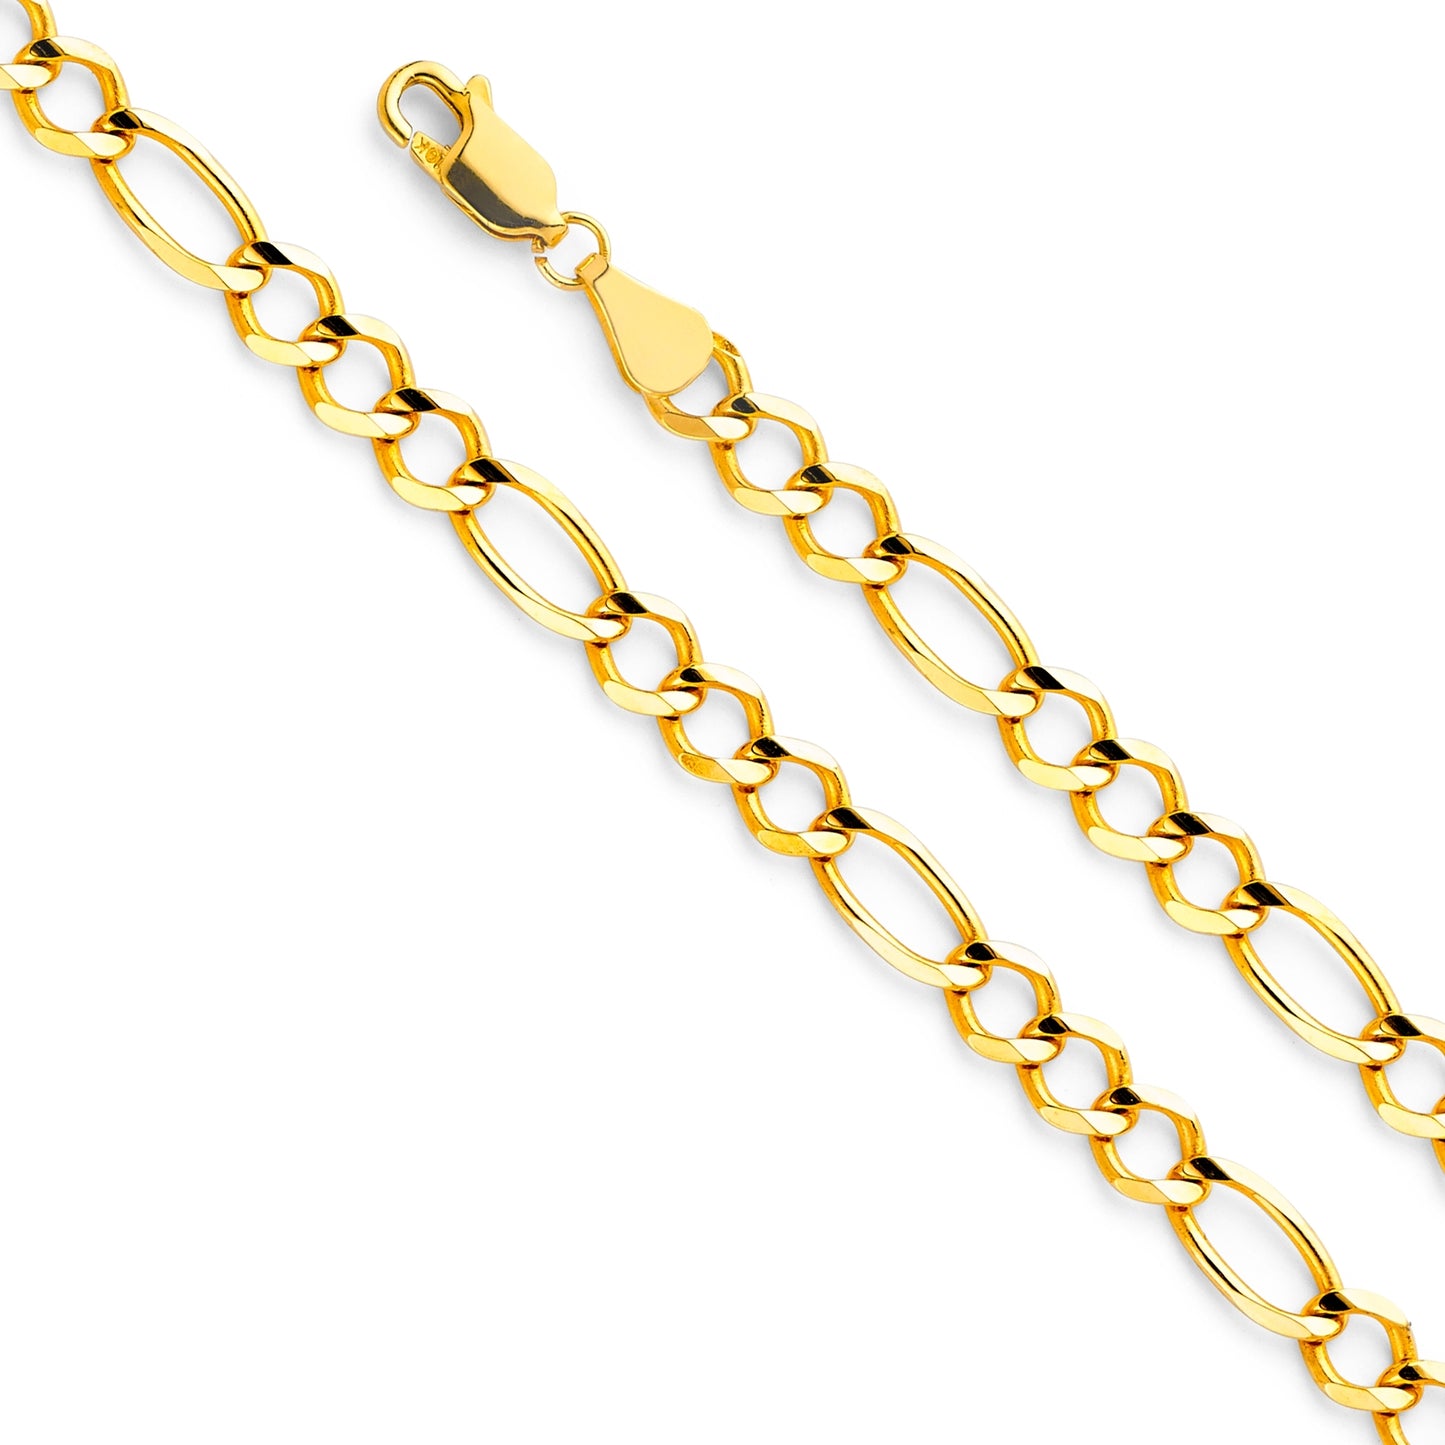 14K Solid Yellow Gold Open Figaro Chain 6.2mm thick 26 Inches.  Made in Italy